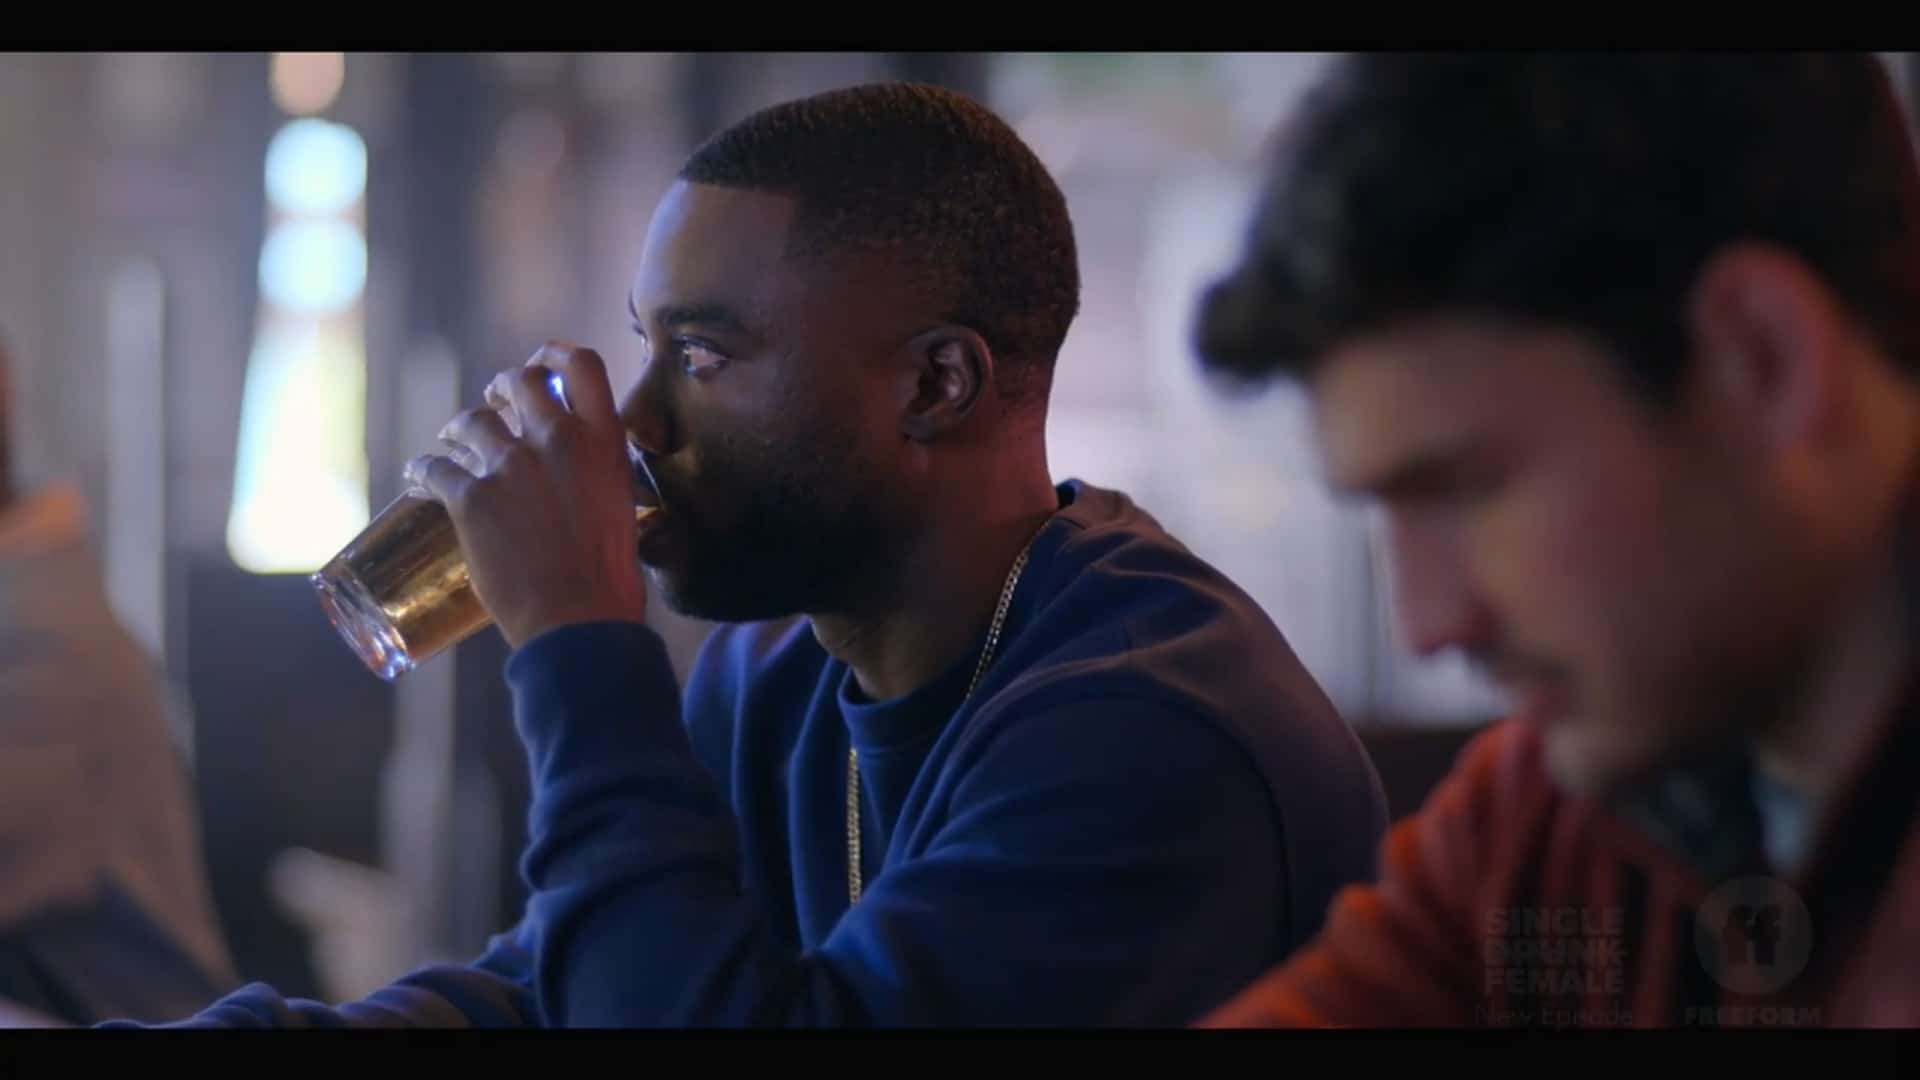 James drinking with Joel